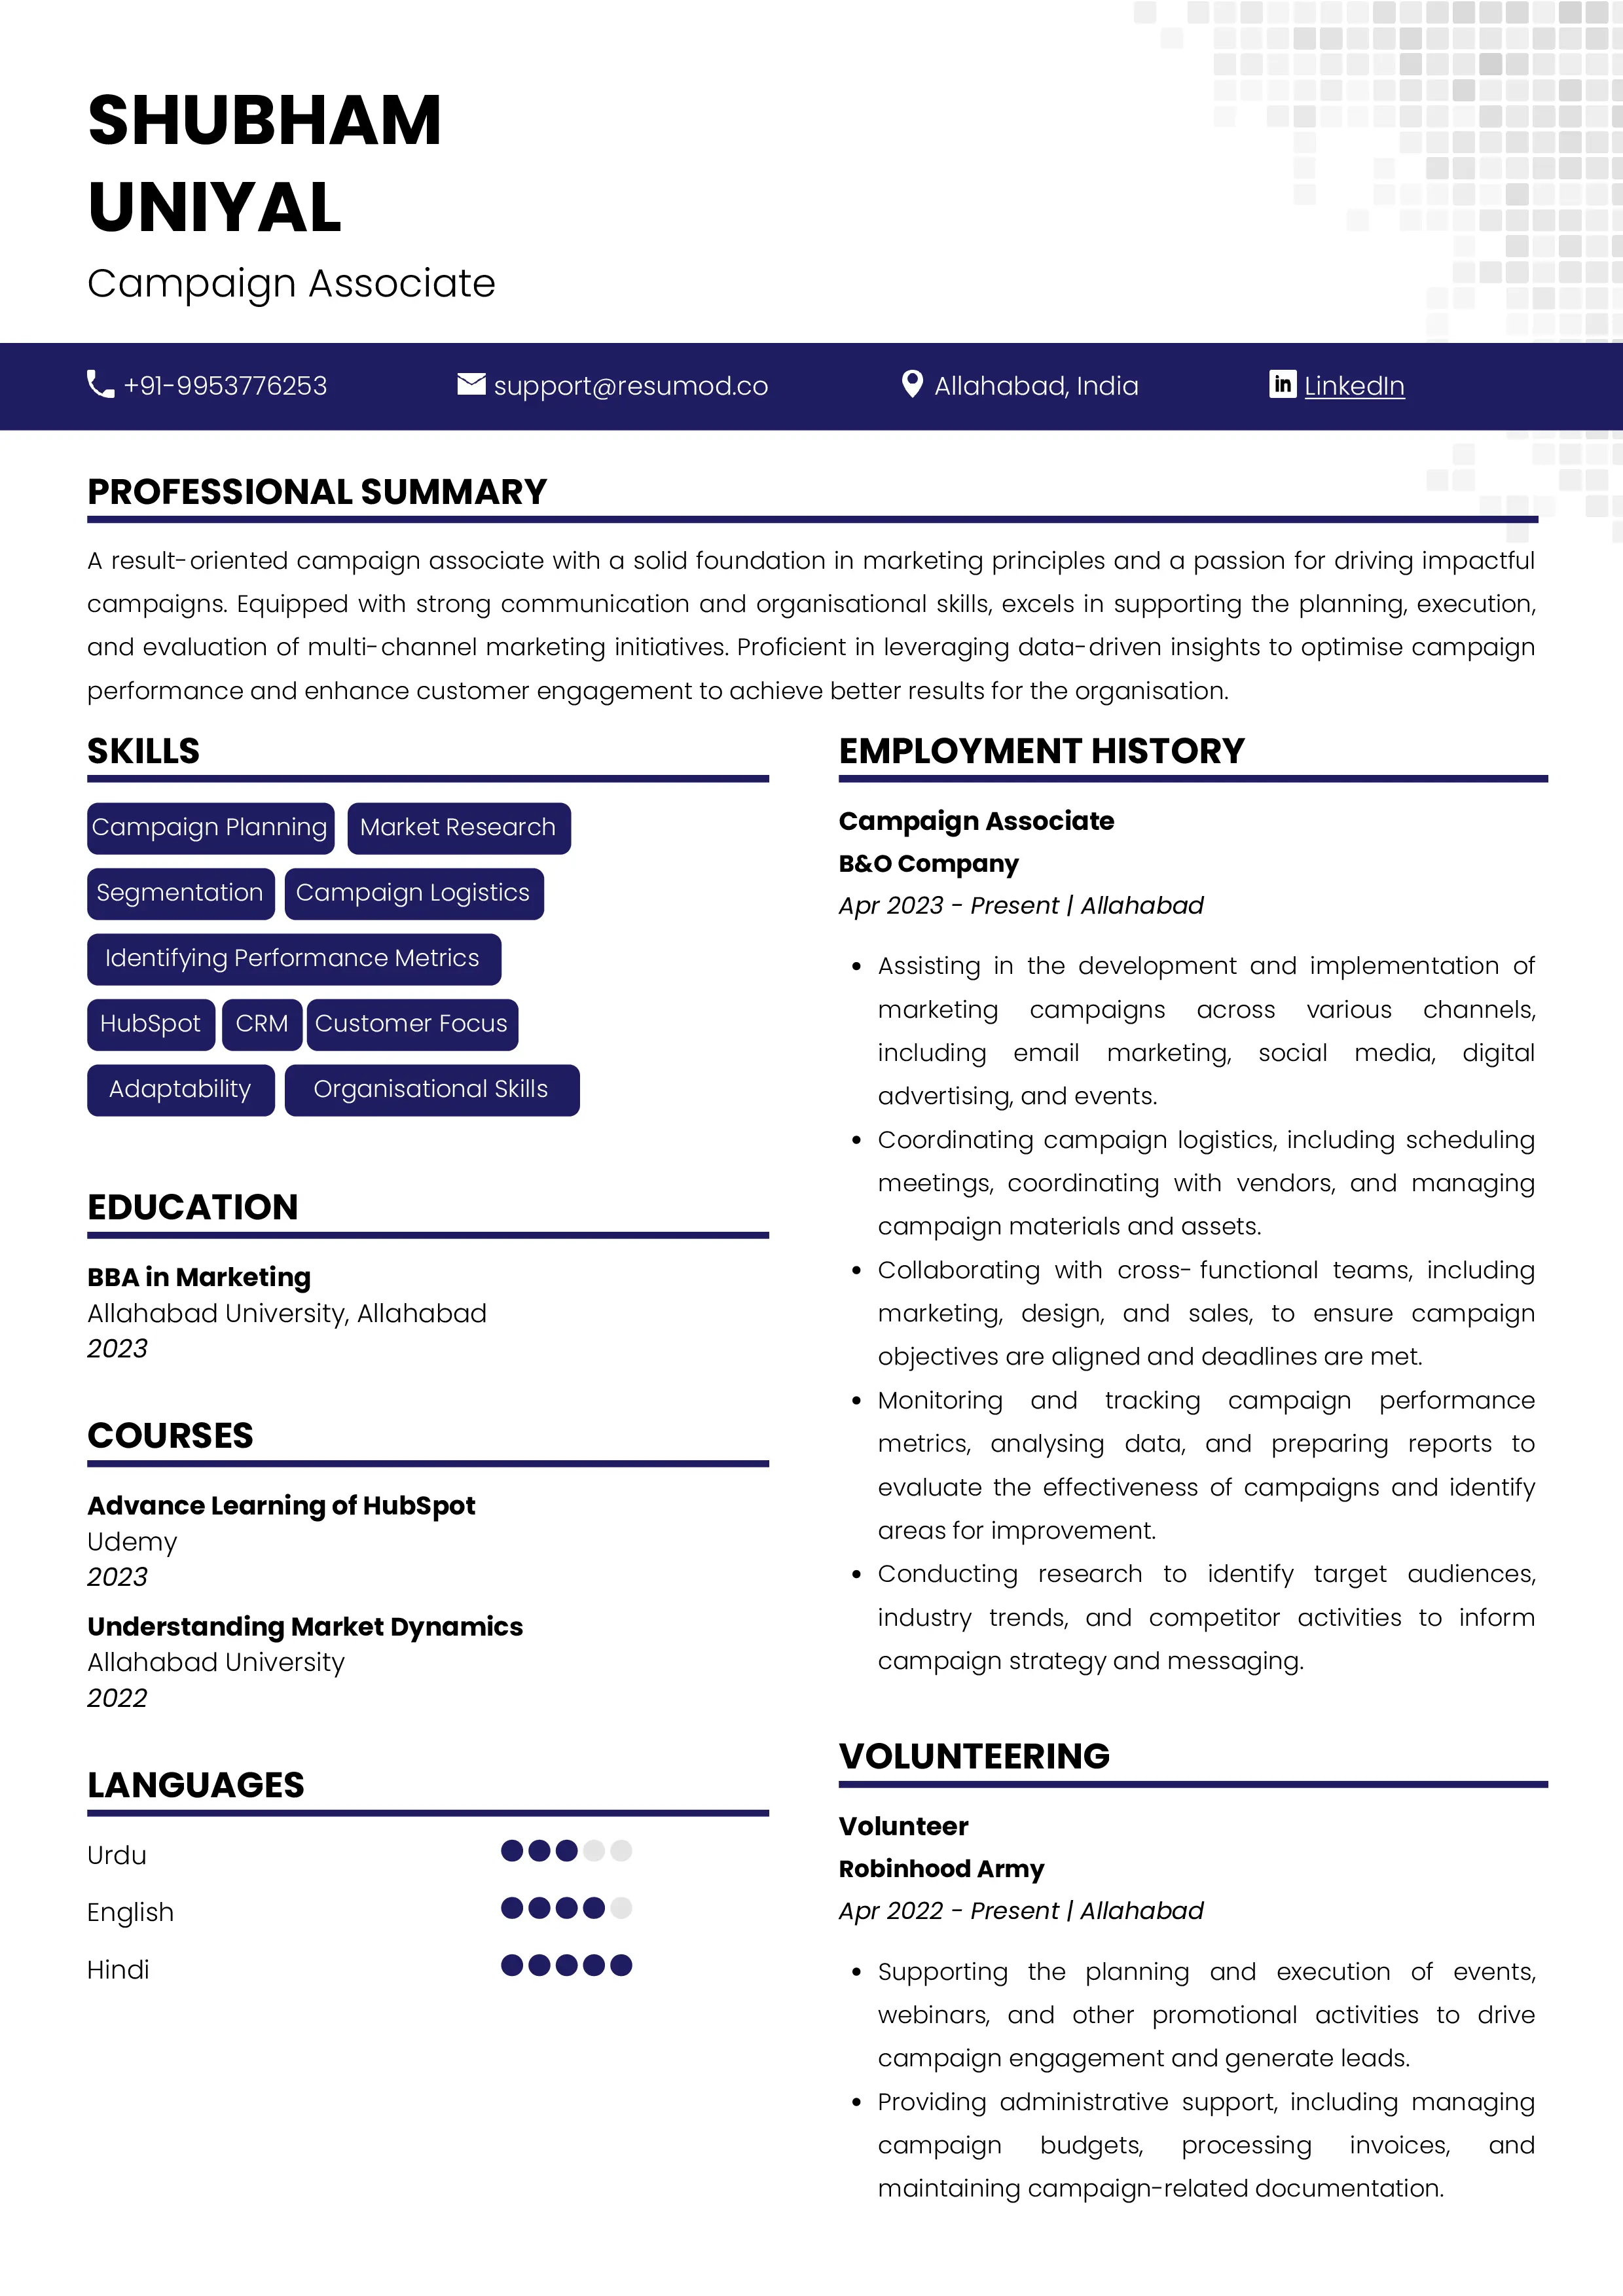 Sample Resume of Campaign Associate | Free Resume Templates & Samples on Resumod.co